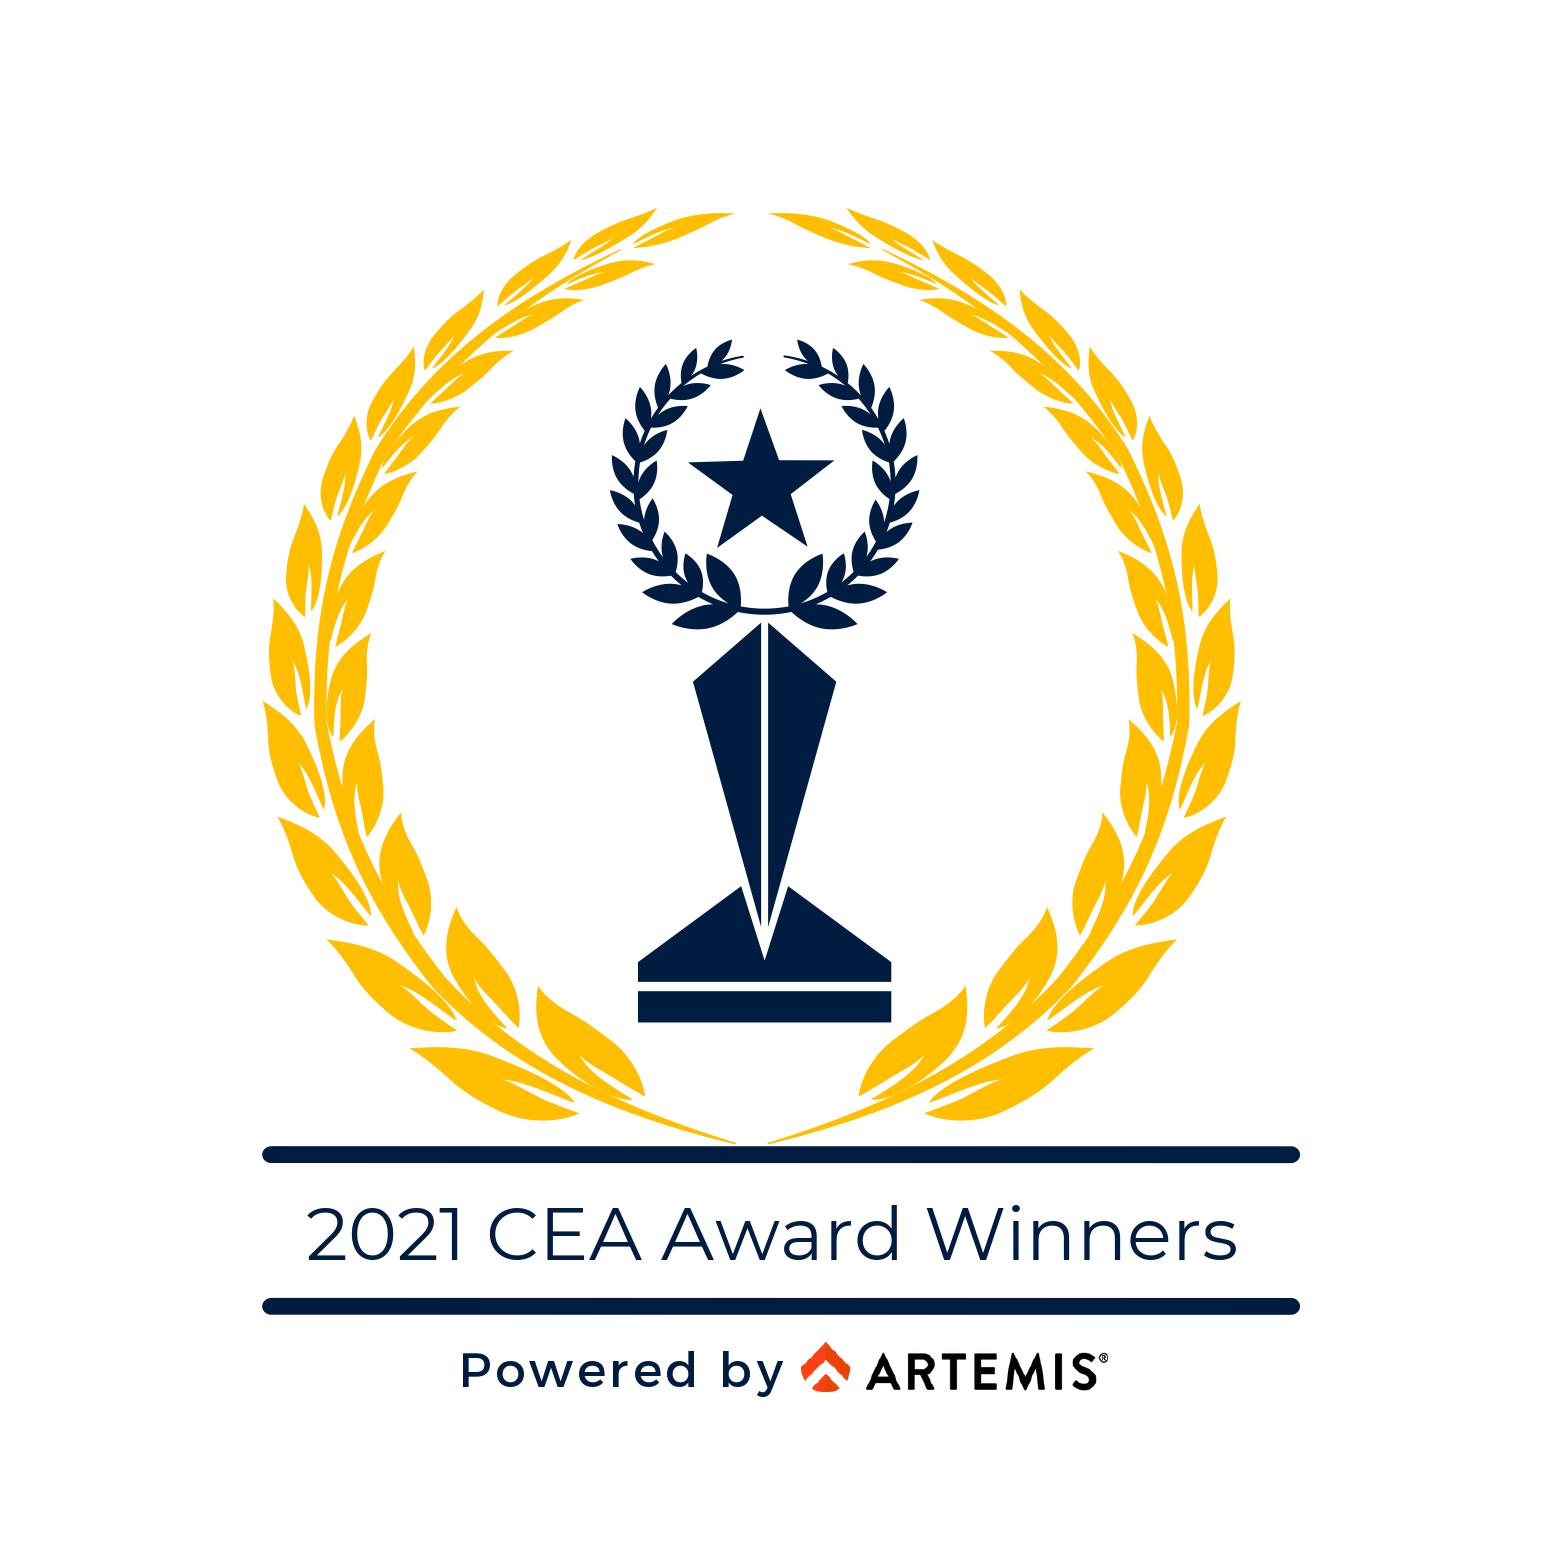 Winners Announced for the 2021 CEA Awards